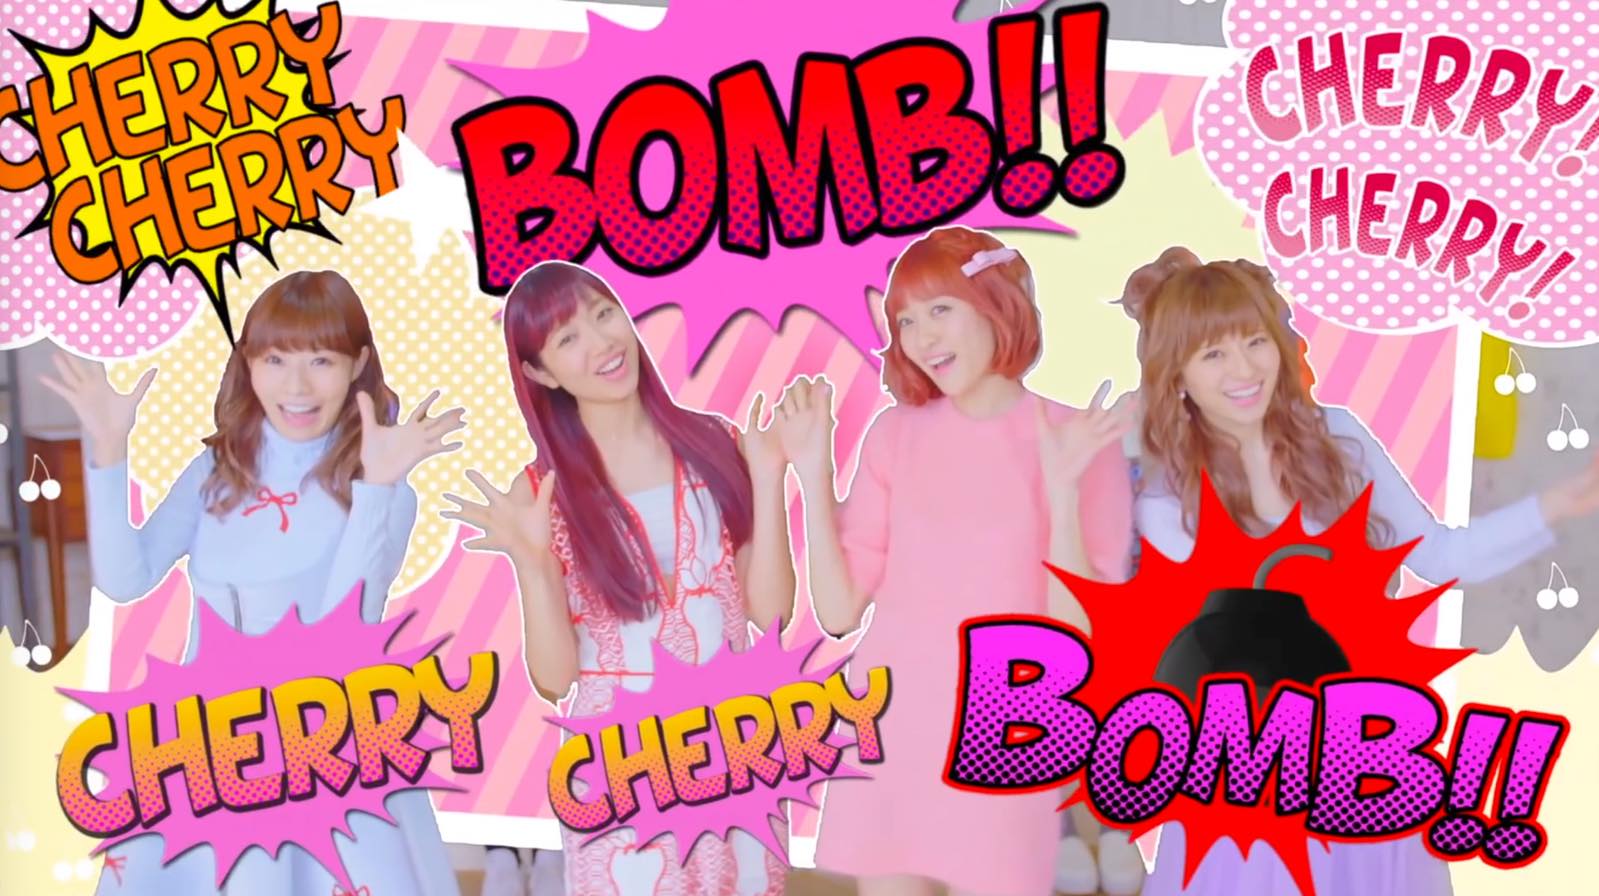 Silent Siren Will Make You Blow Your Top With the MV for “Cherry Bomb”!